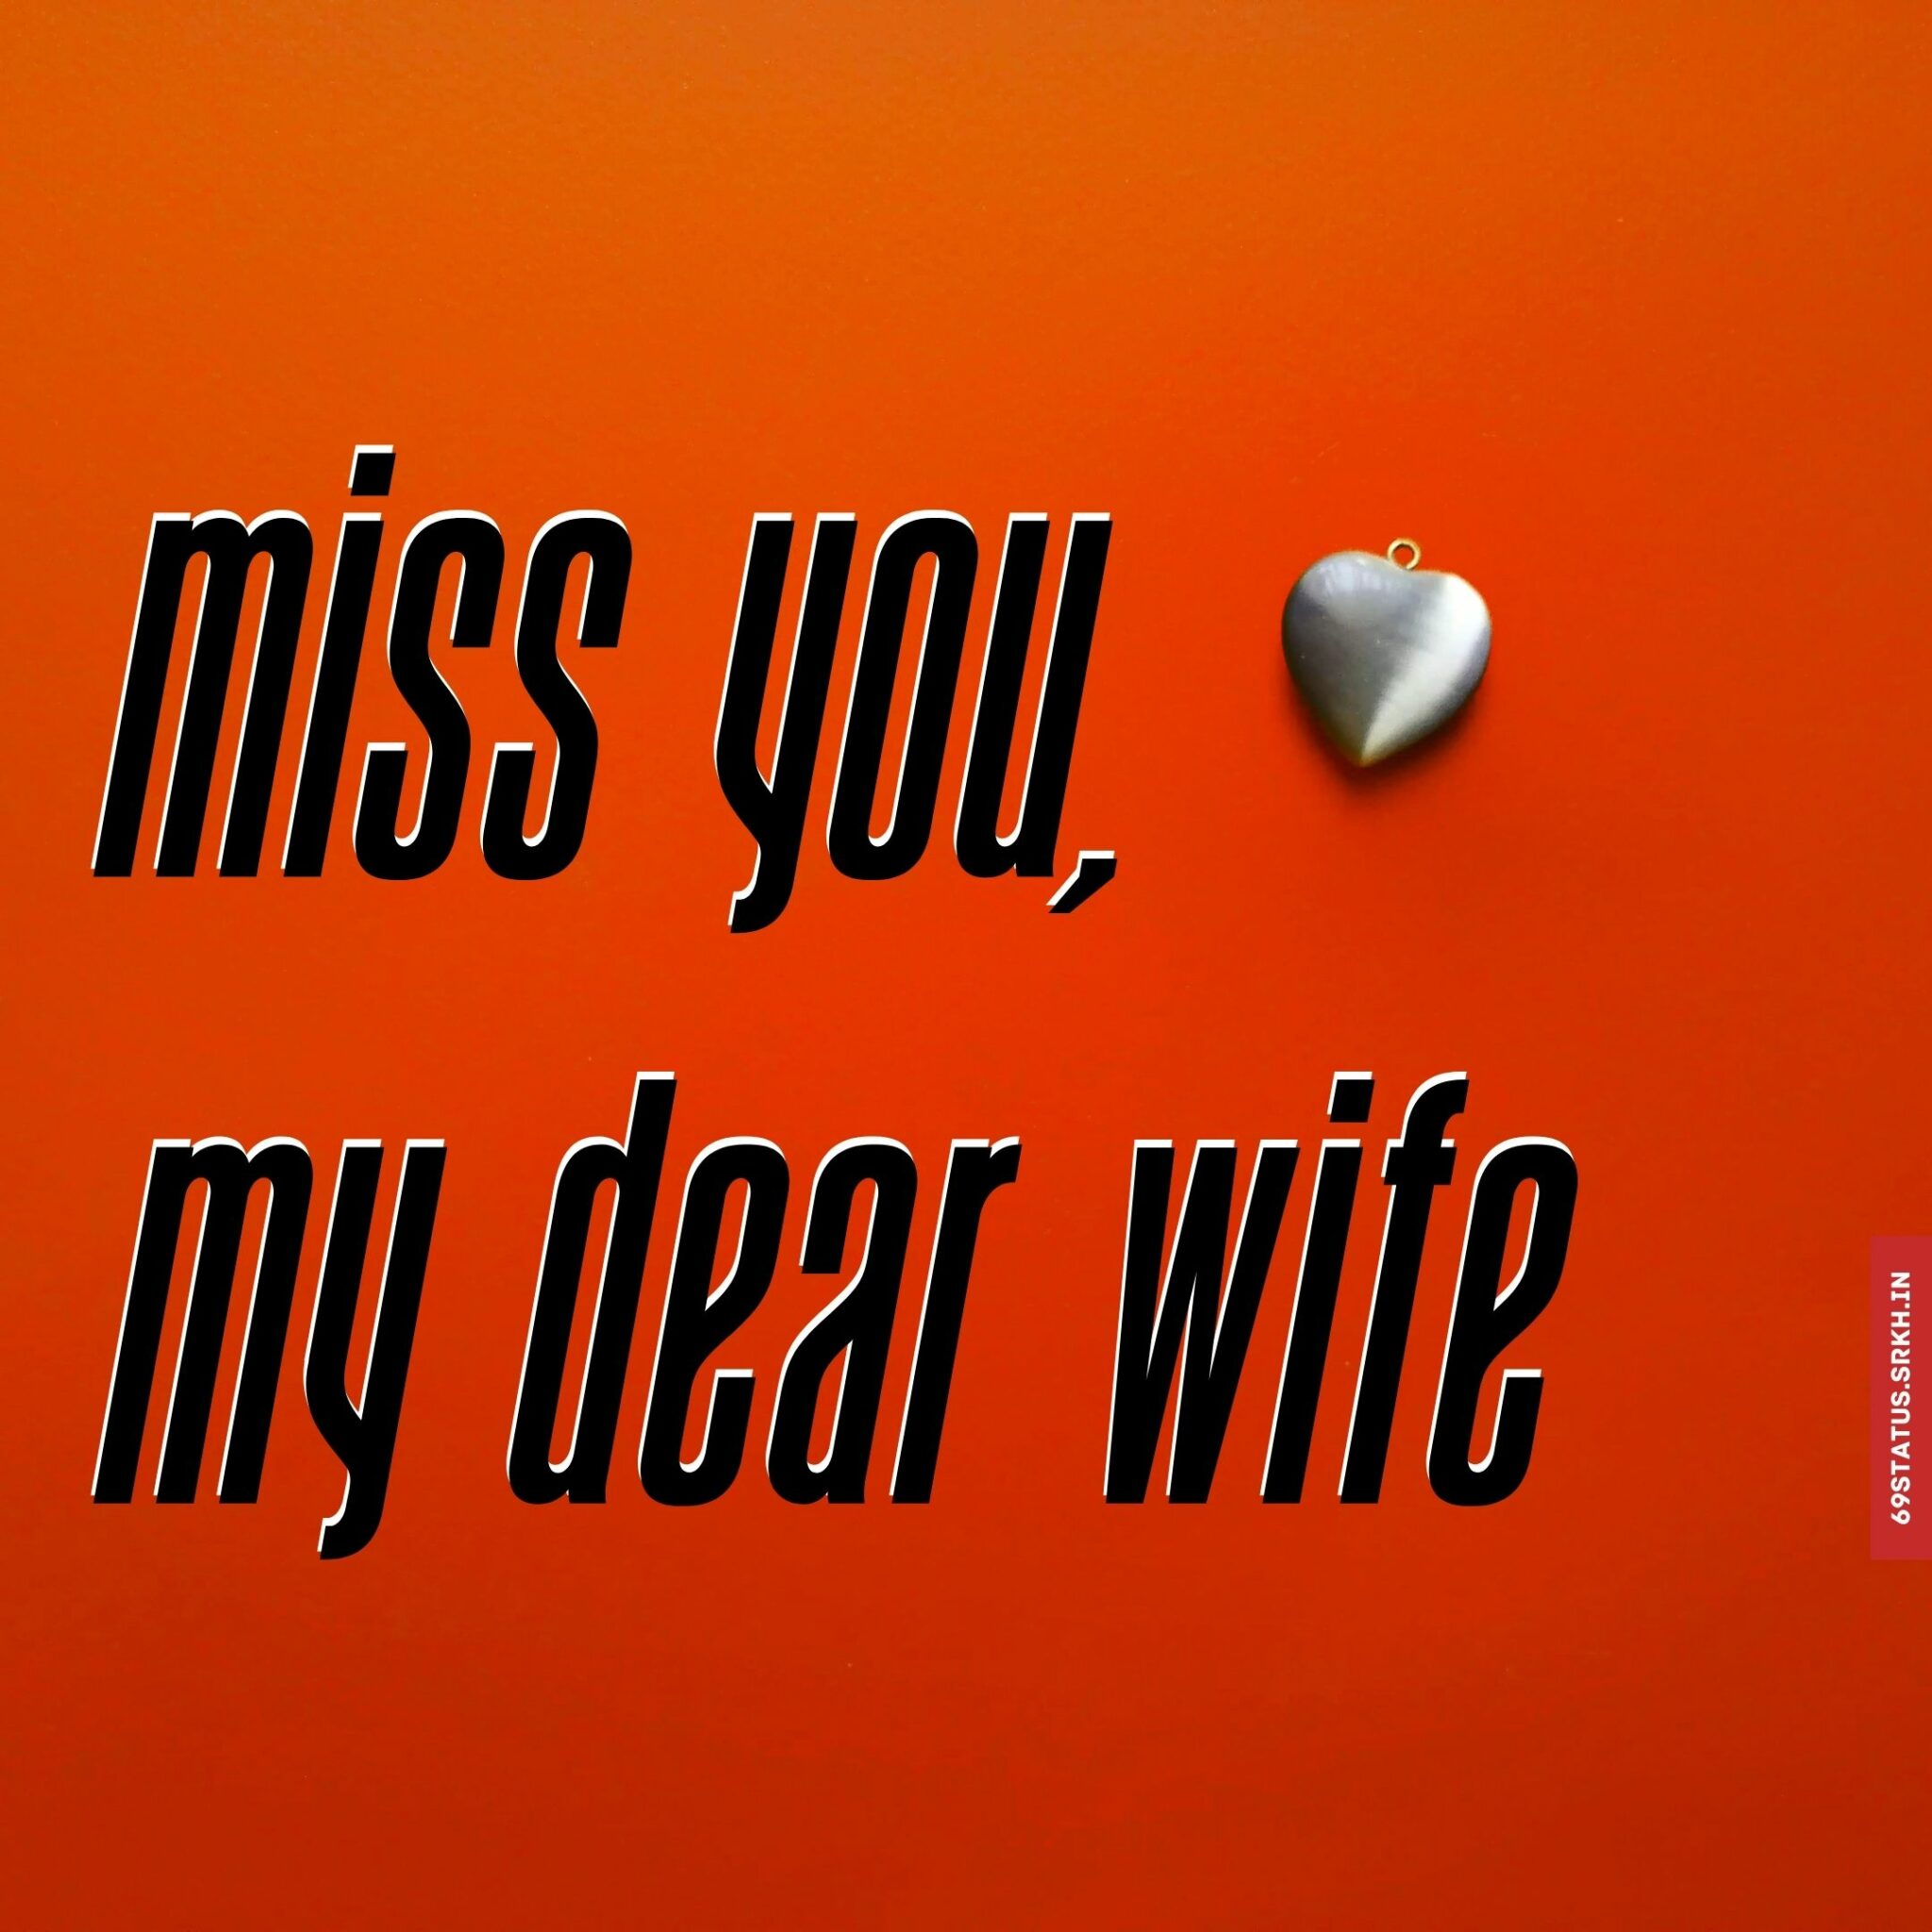 Miss you wife images